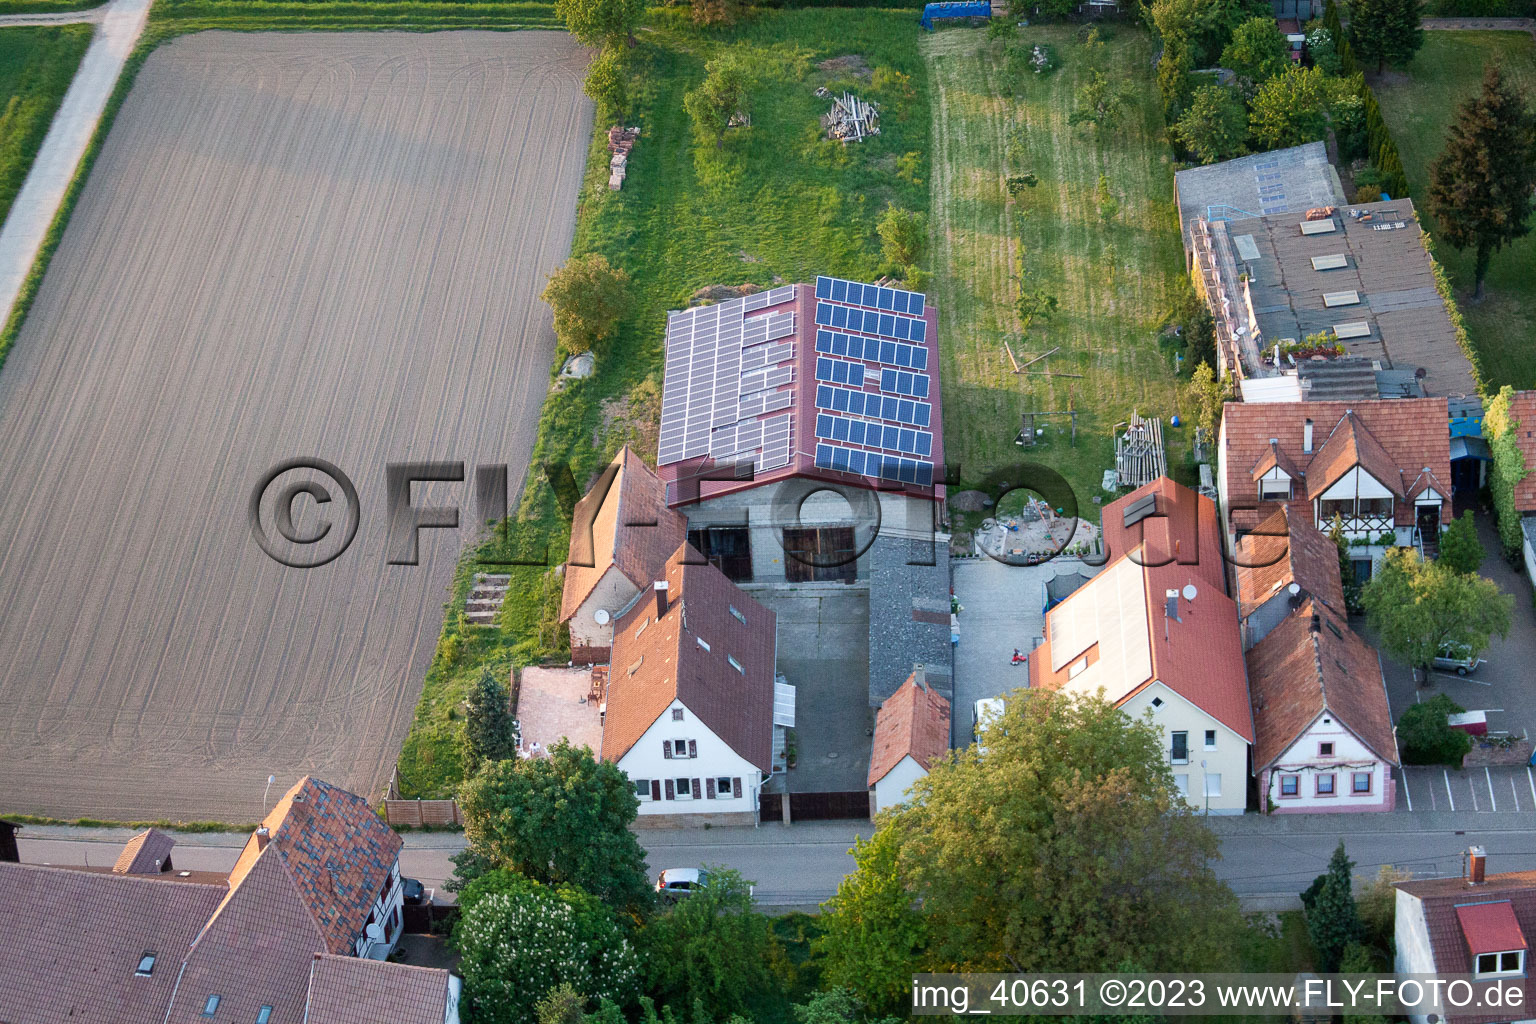 Brehmstr in the district Minderslachen in Kandel in the state Rhineland-Palatinate, Germany from the drone perspective